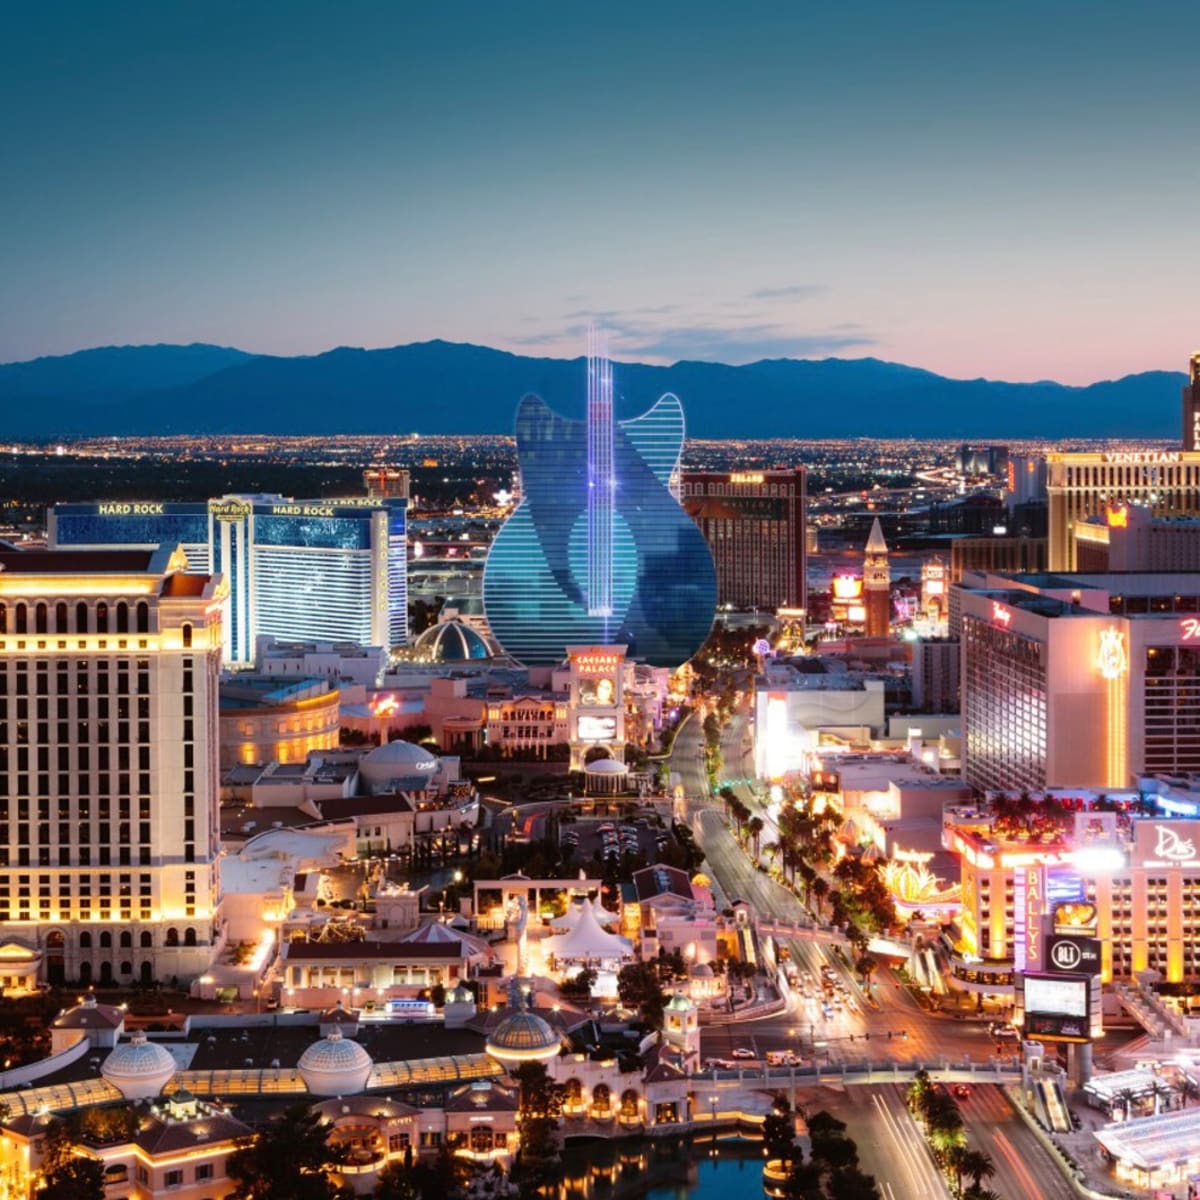 The Las Vegas Strip will have a new mega resort opening in